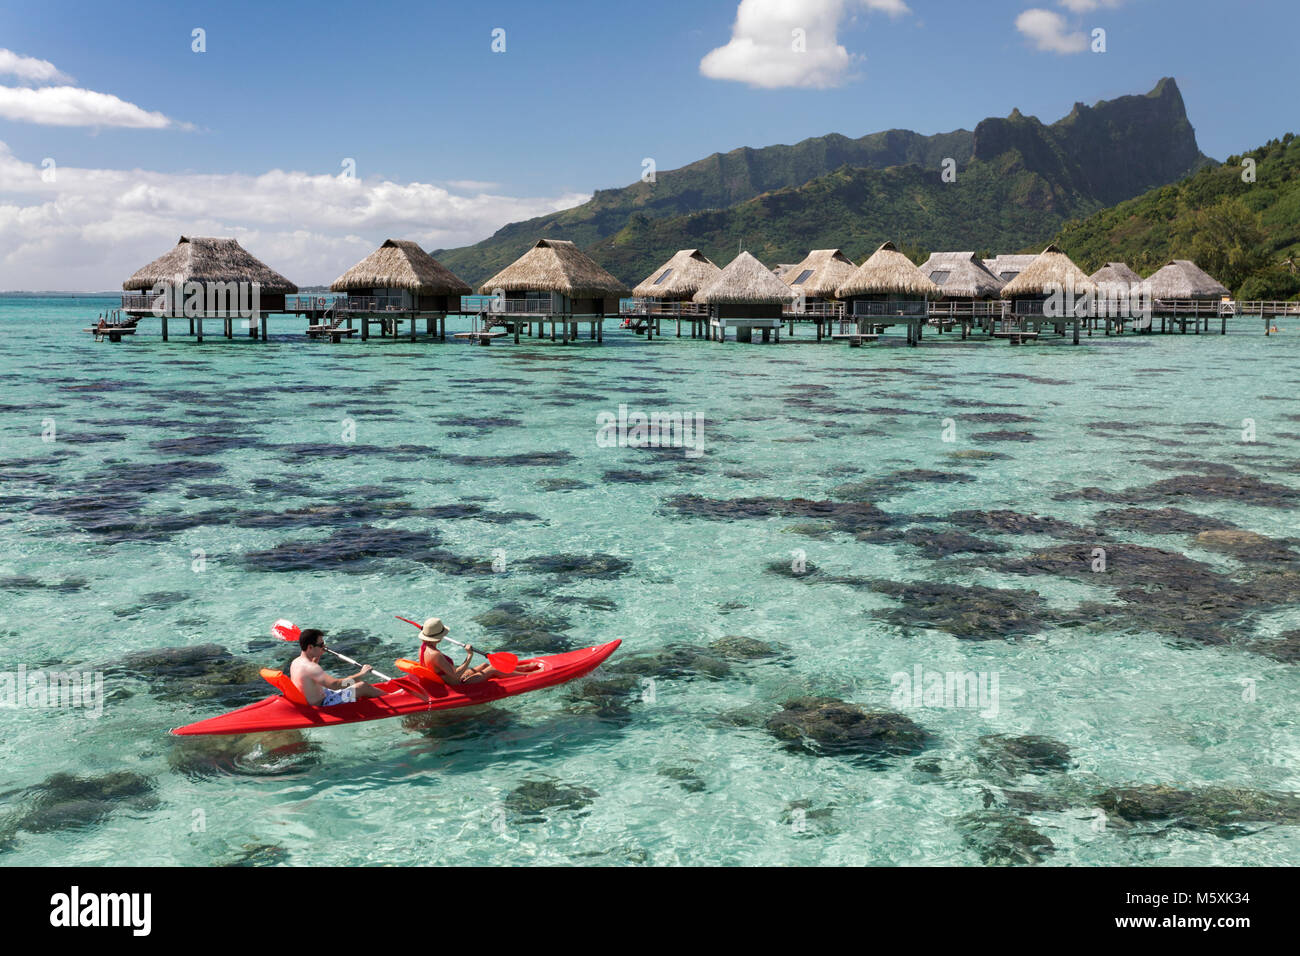 Lagoon, water bungalows, paddleboat, hills, Moorea, Pacific Ocean, Society Islands, French Polynesia Stock Photo